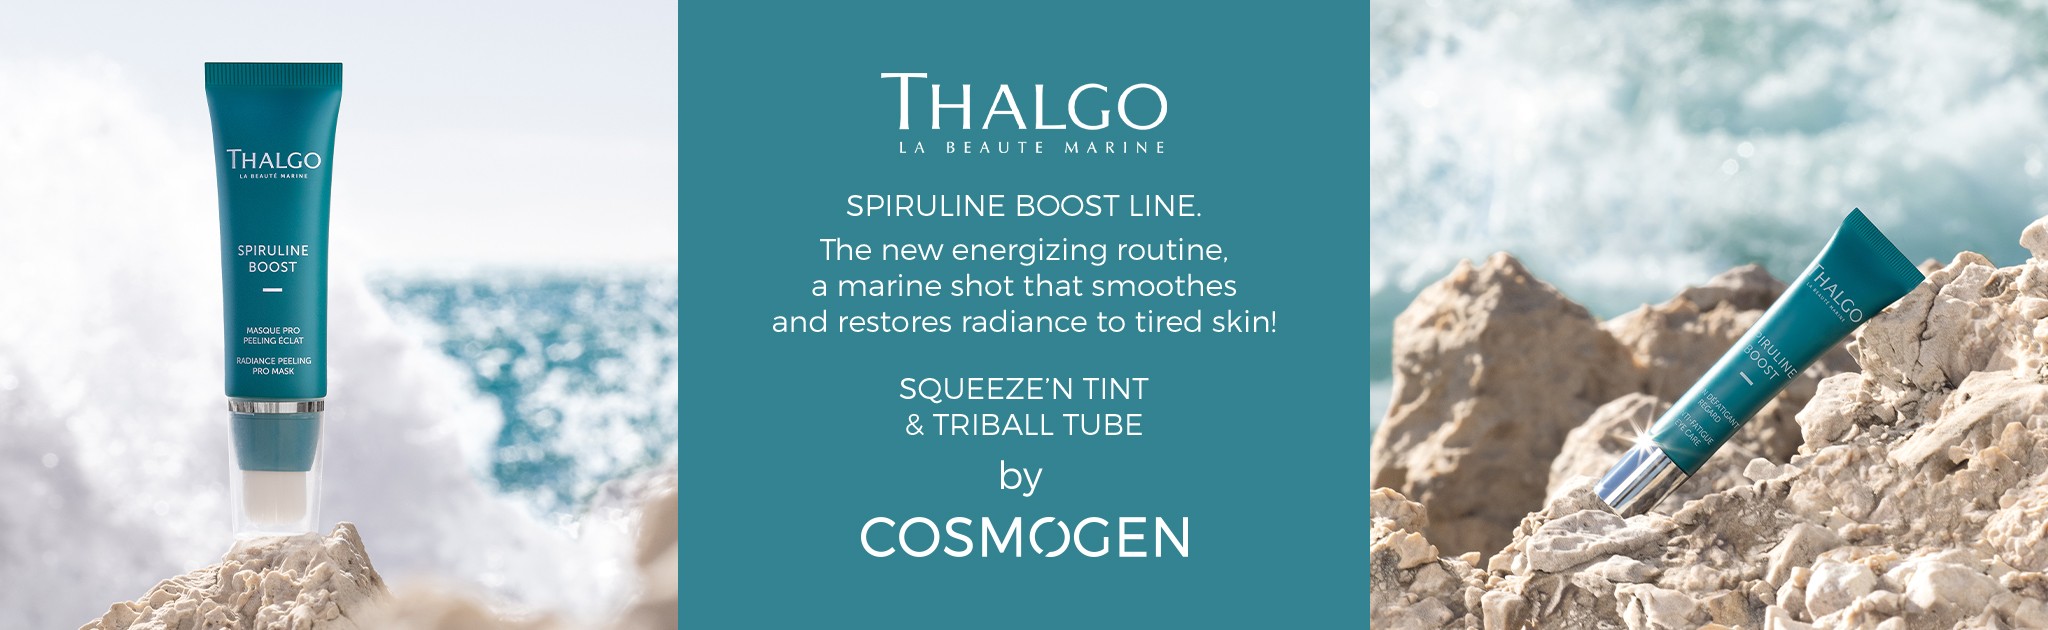 https://www.cosmogen.fr/refillable-squeeze-n-tint-hair.html?search_query=tint&results=17